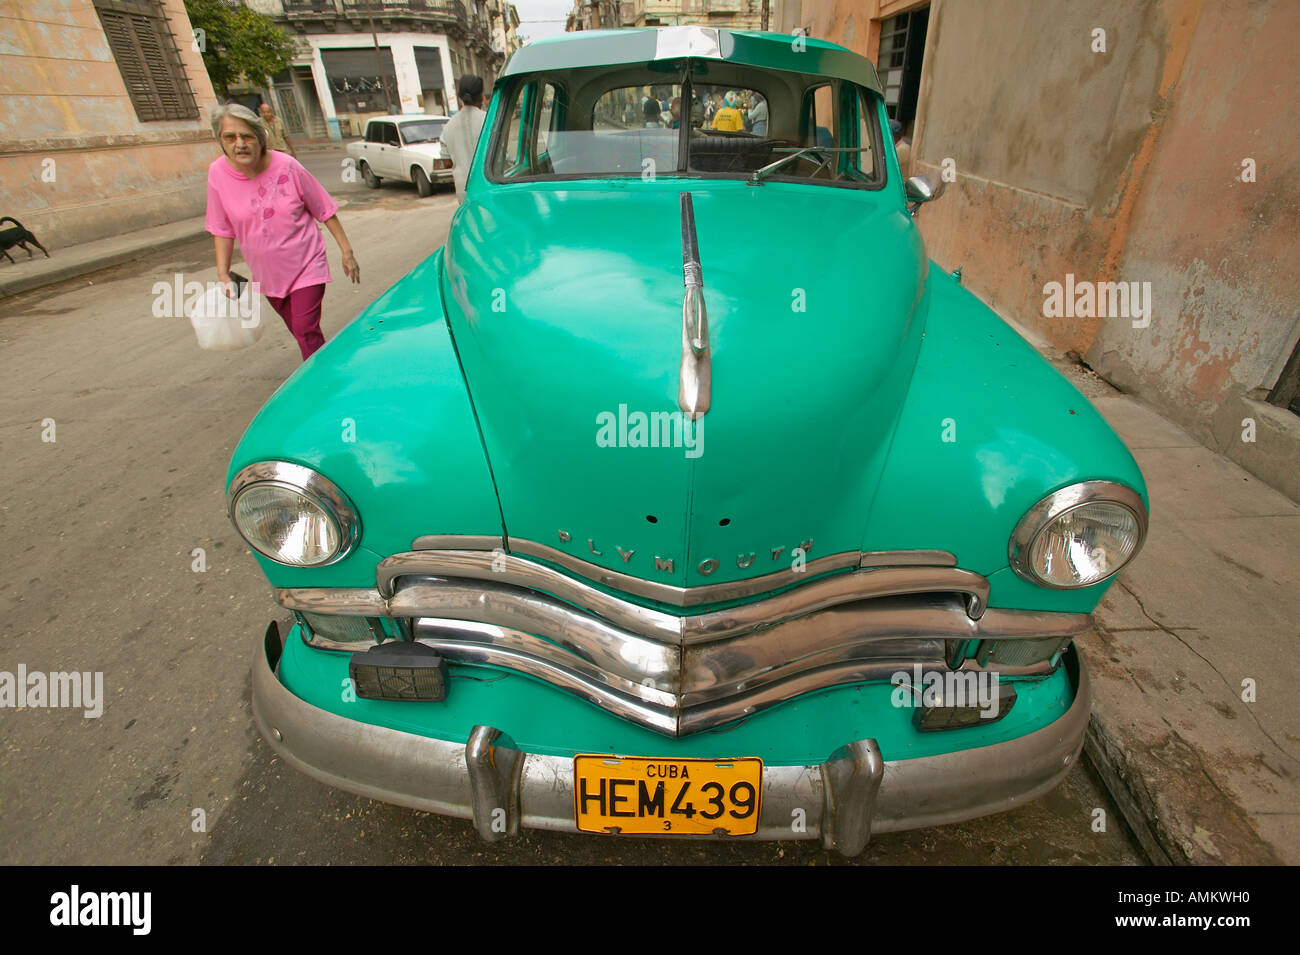 A woman walking in front of turquoise old Dodge parked in front of old buildings in Havana Cuba Stock Photo